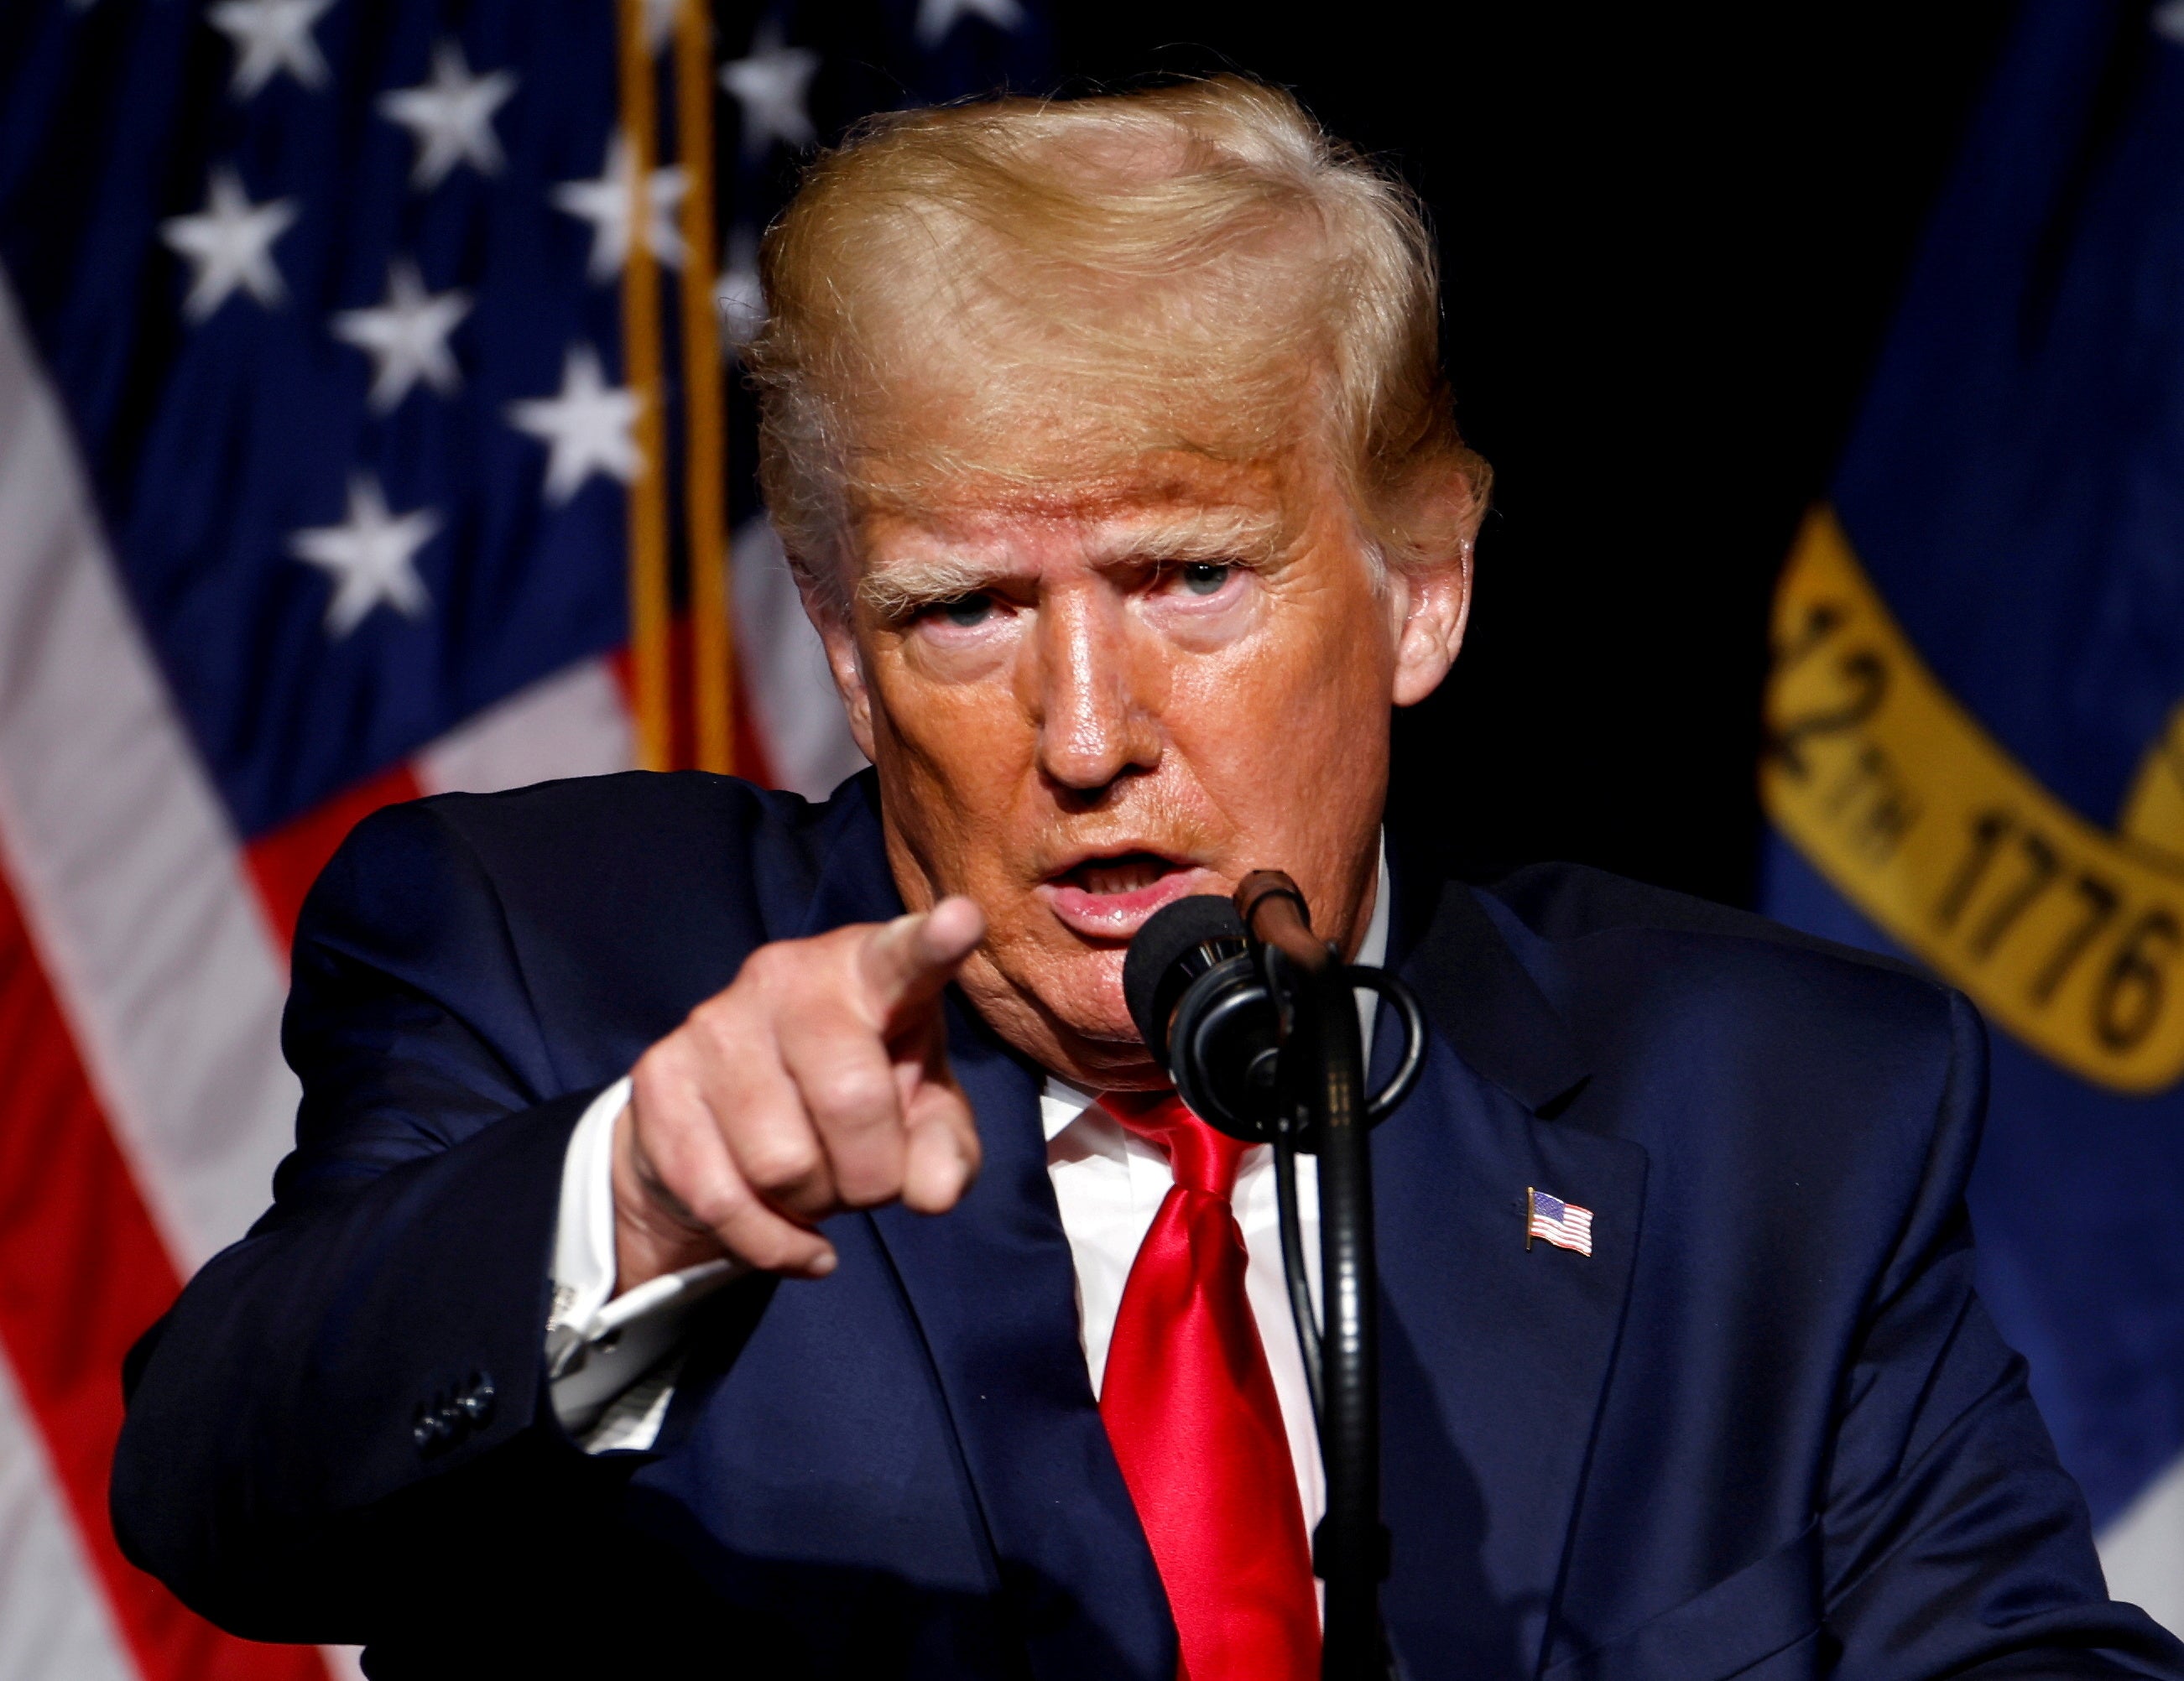 File image: Former US President Donald Trump points at the media while speaking at the North Carolina GOP convention dinner in Greenville, North Carolina, US, on 5 June, 2021